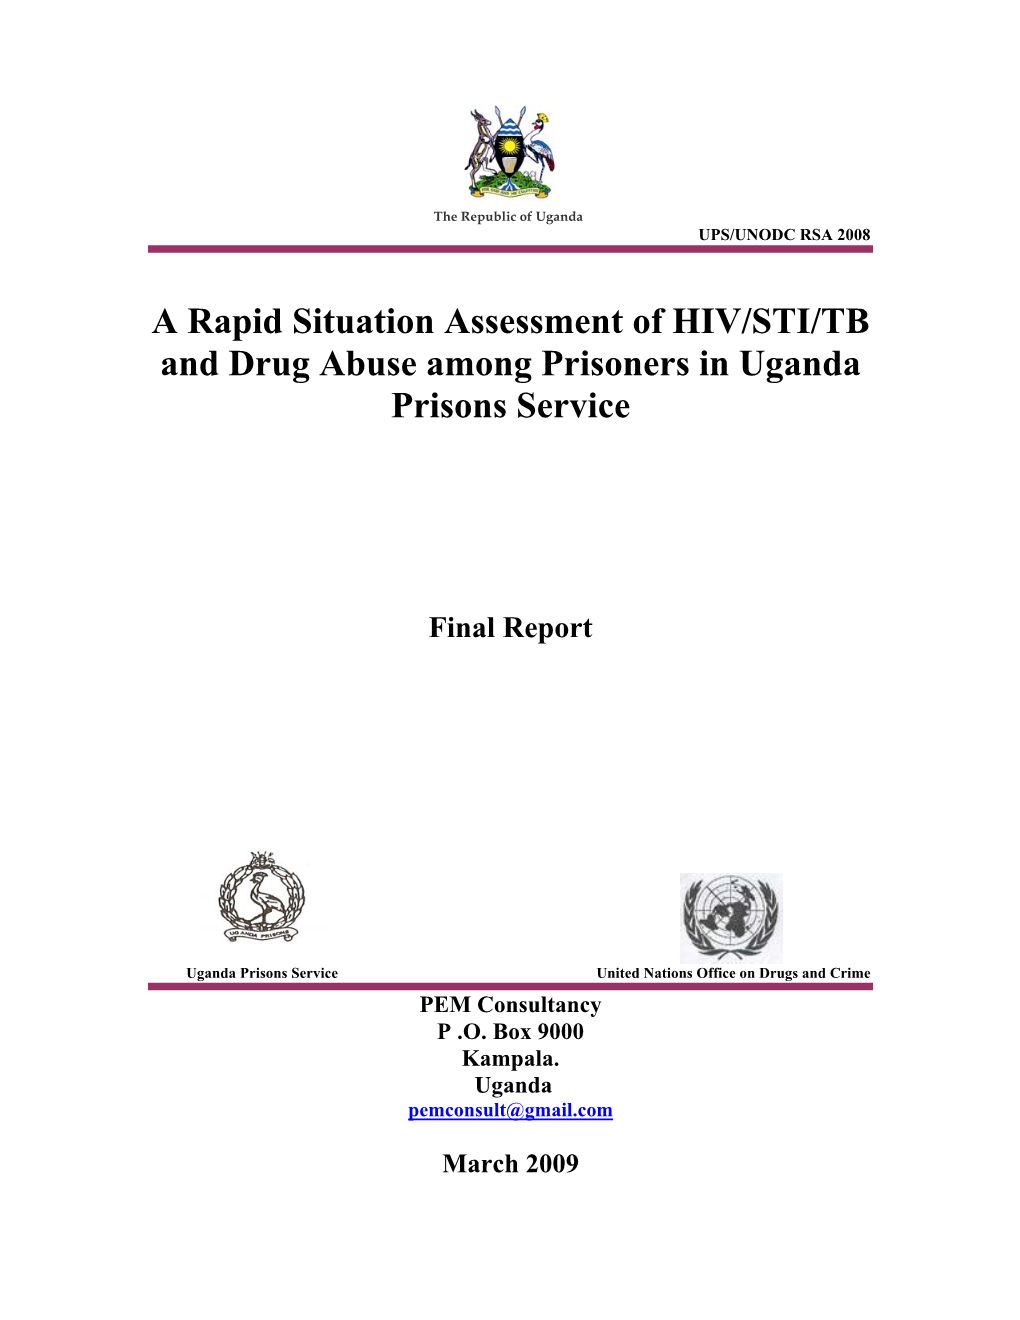 A Rapid Situation Assessment of HIV/STI/TB and Drug Abuse Among Prisoners in Uganda Prisons Service